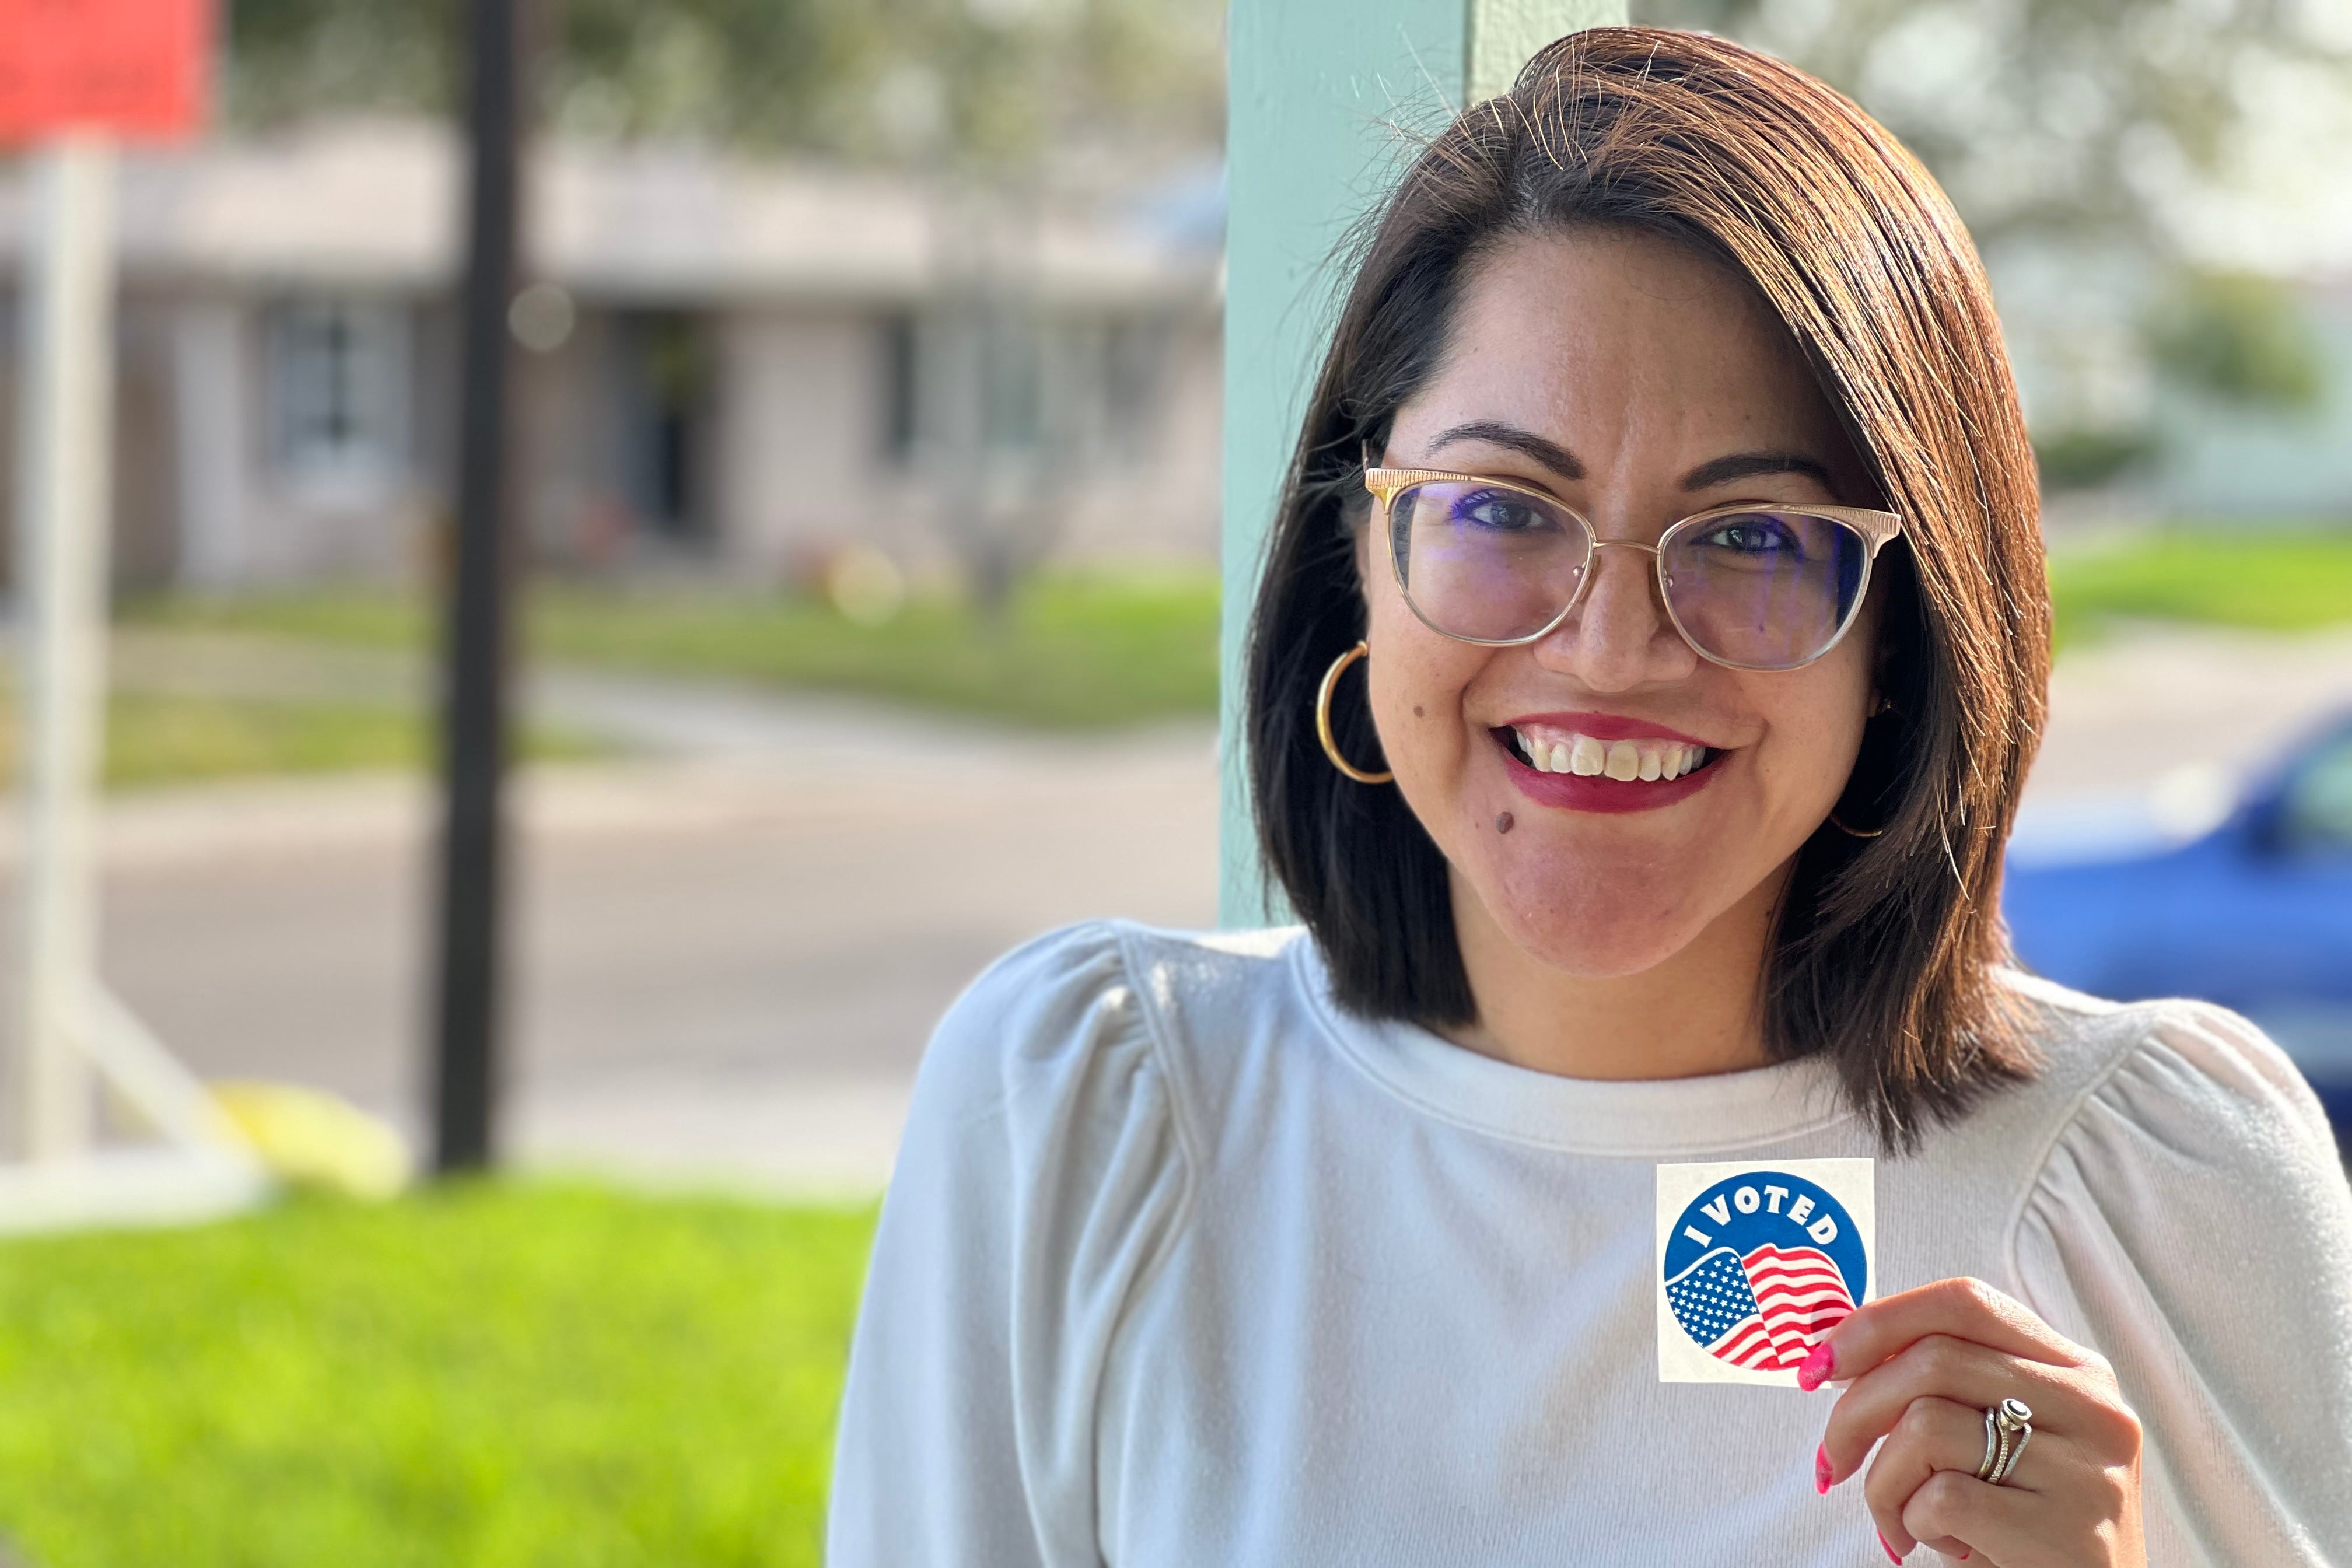 A woman with short brown hair and wearing a white blouse holds a sticker that says "I Voted" while posing for a photograph outside.